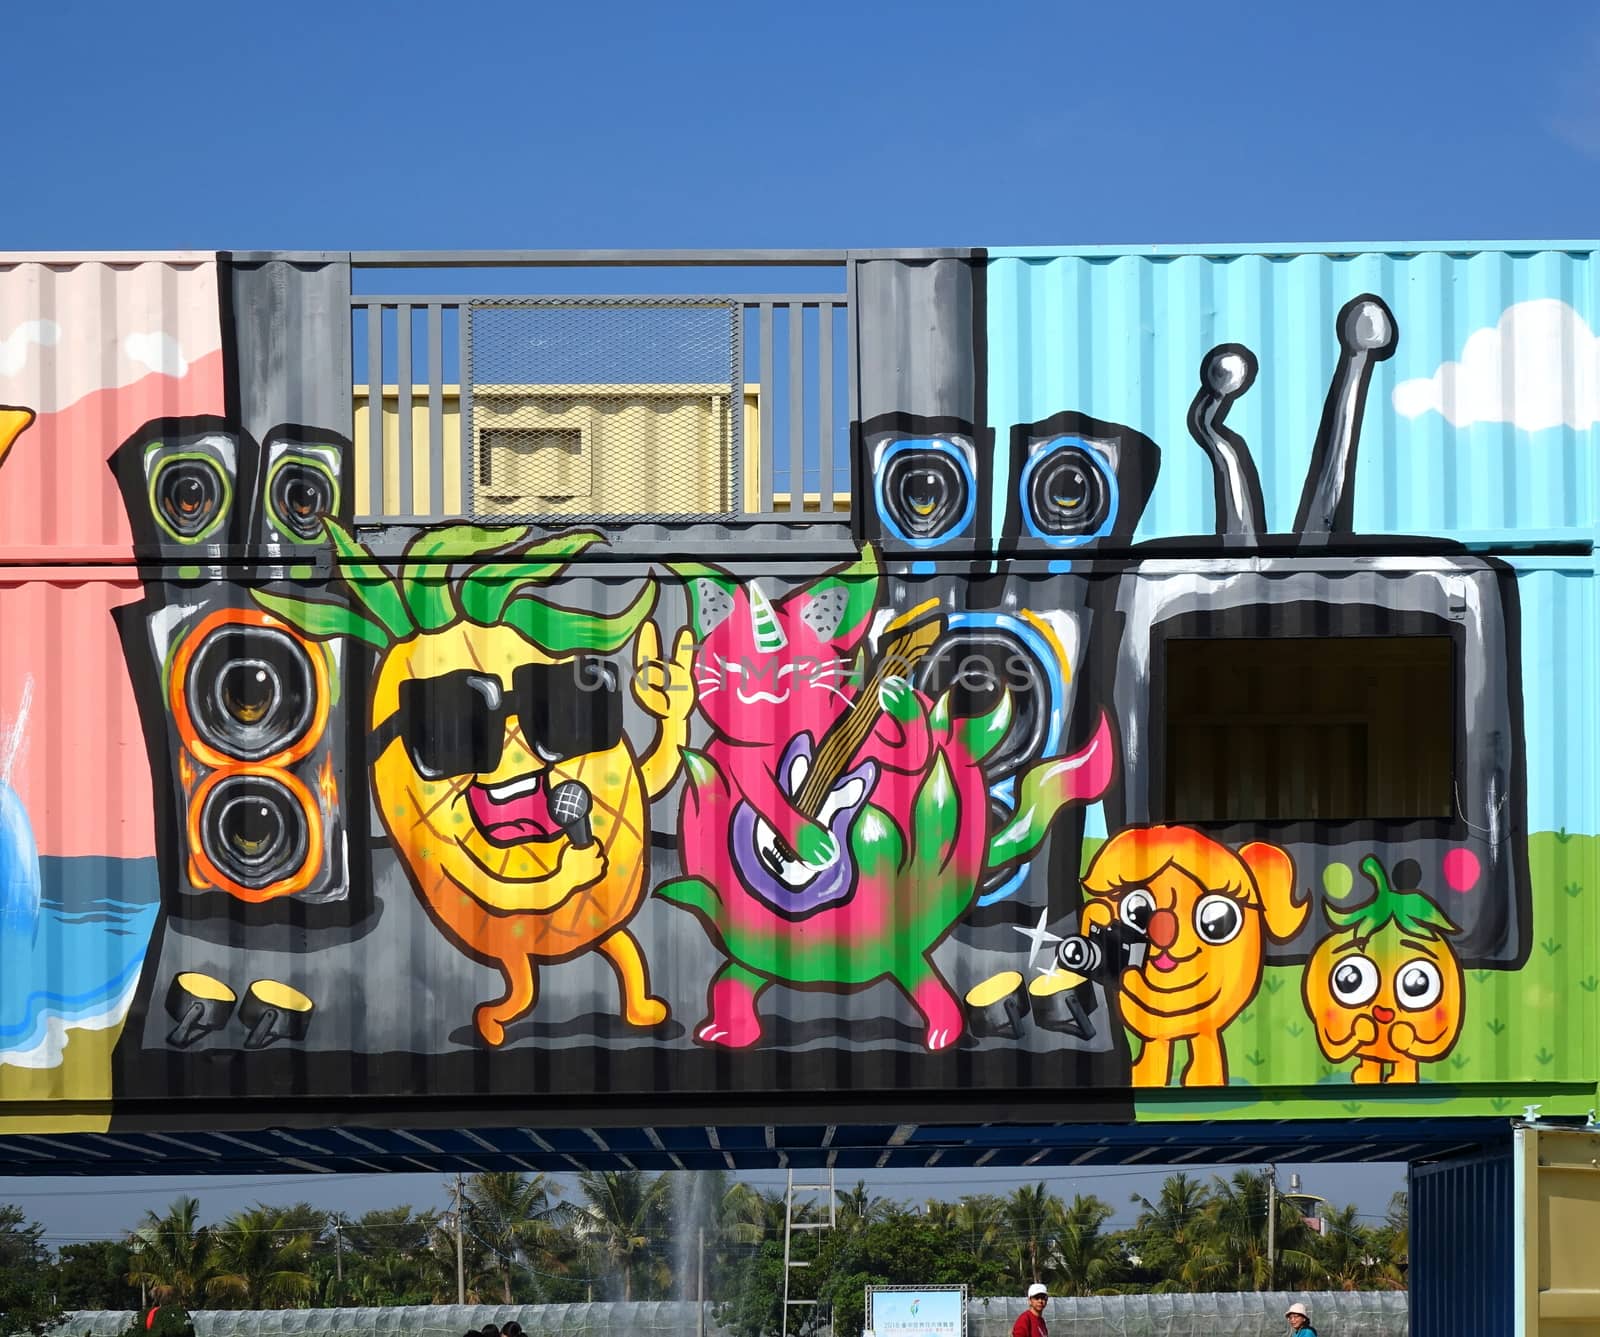 PINGTUNG, TAIWAN -- FEBRUARY 14, 2018: Shipping containers painted with colorful graffiti images form the entrance to the Pingtung Tropical Agricultural Fair.
